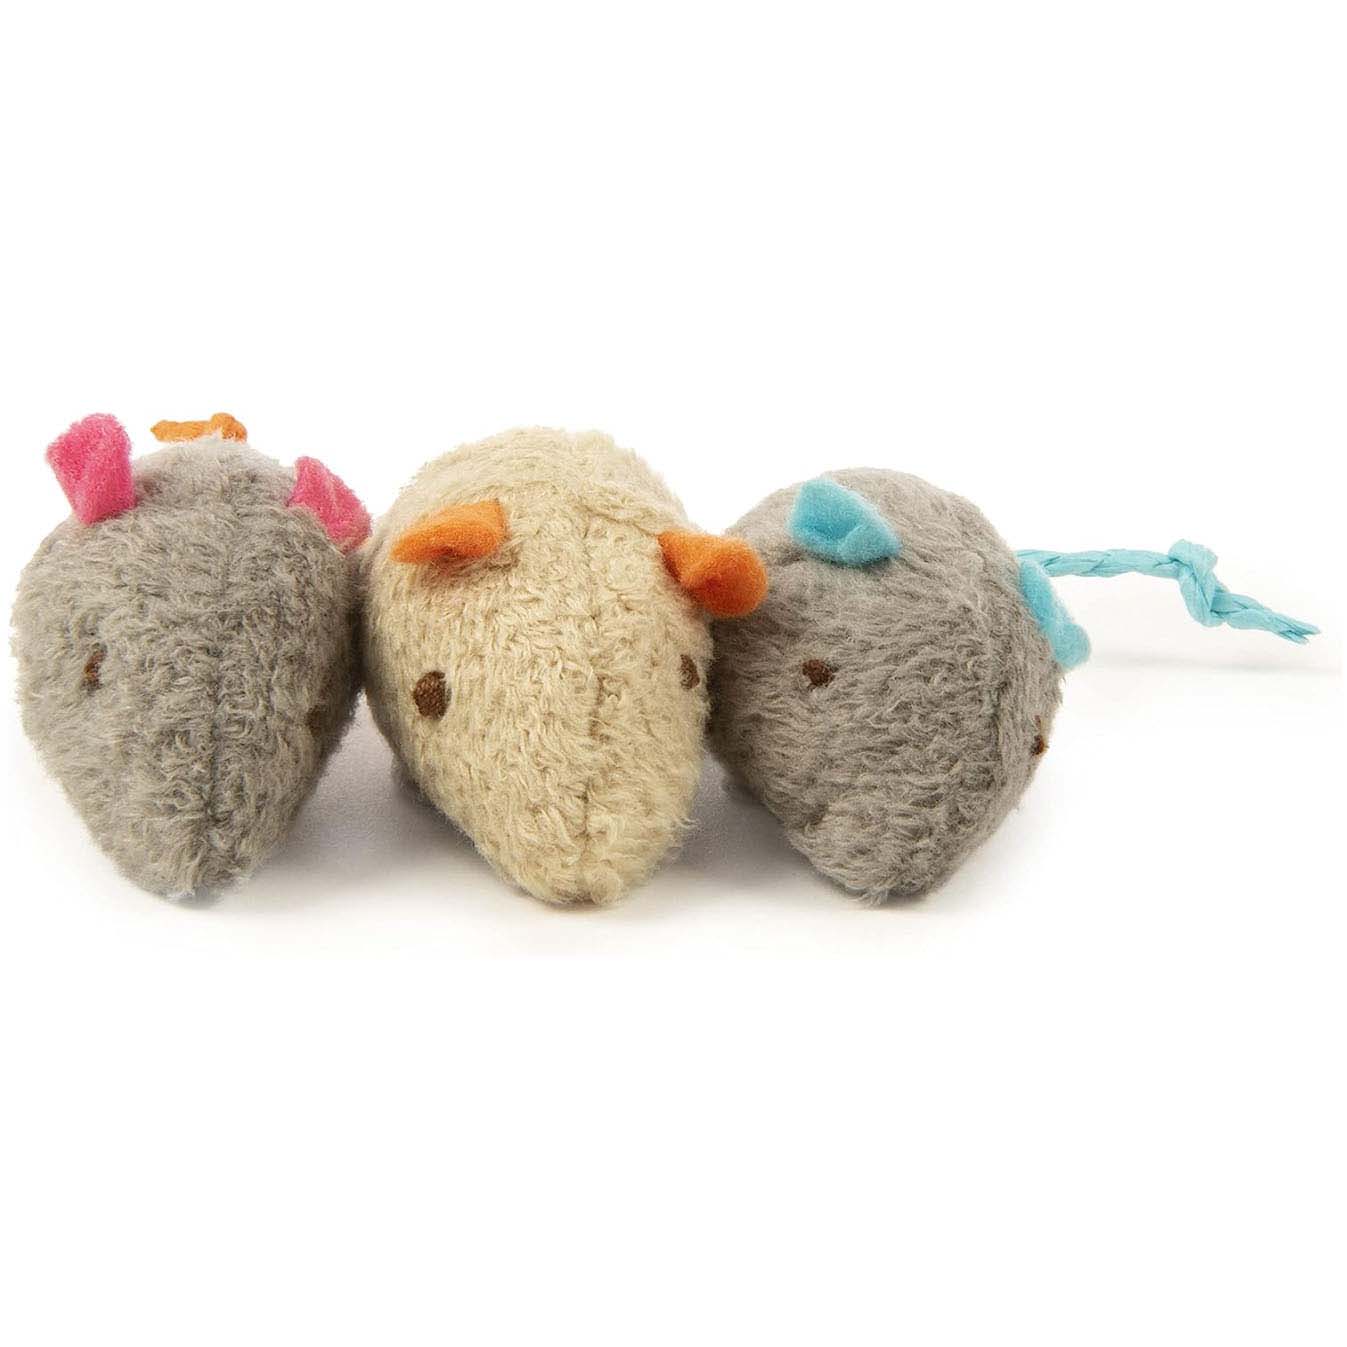 Skitter Critters Catnip Cat Toys with 3 mice